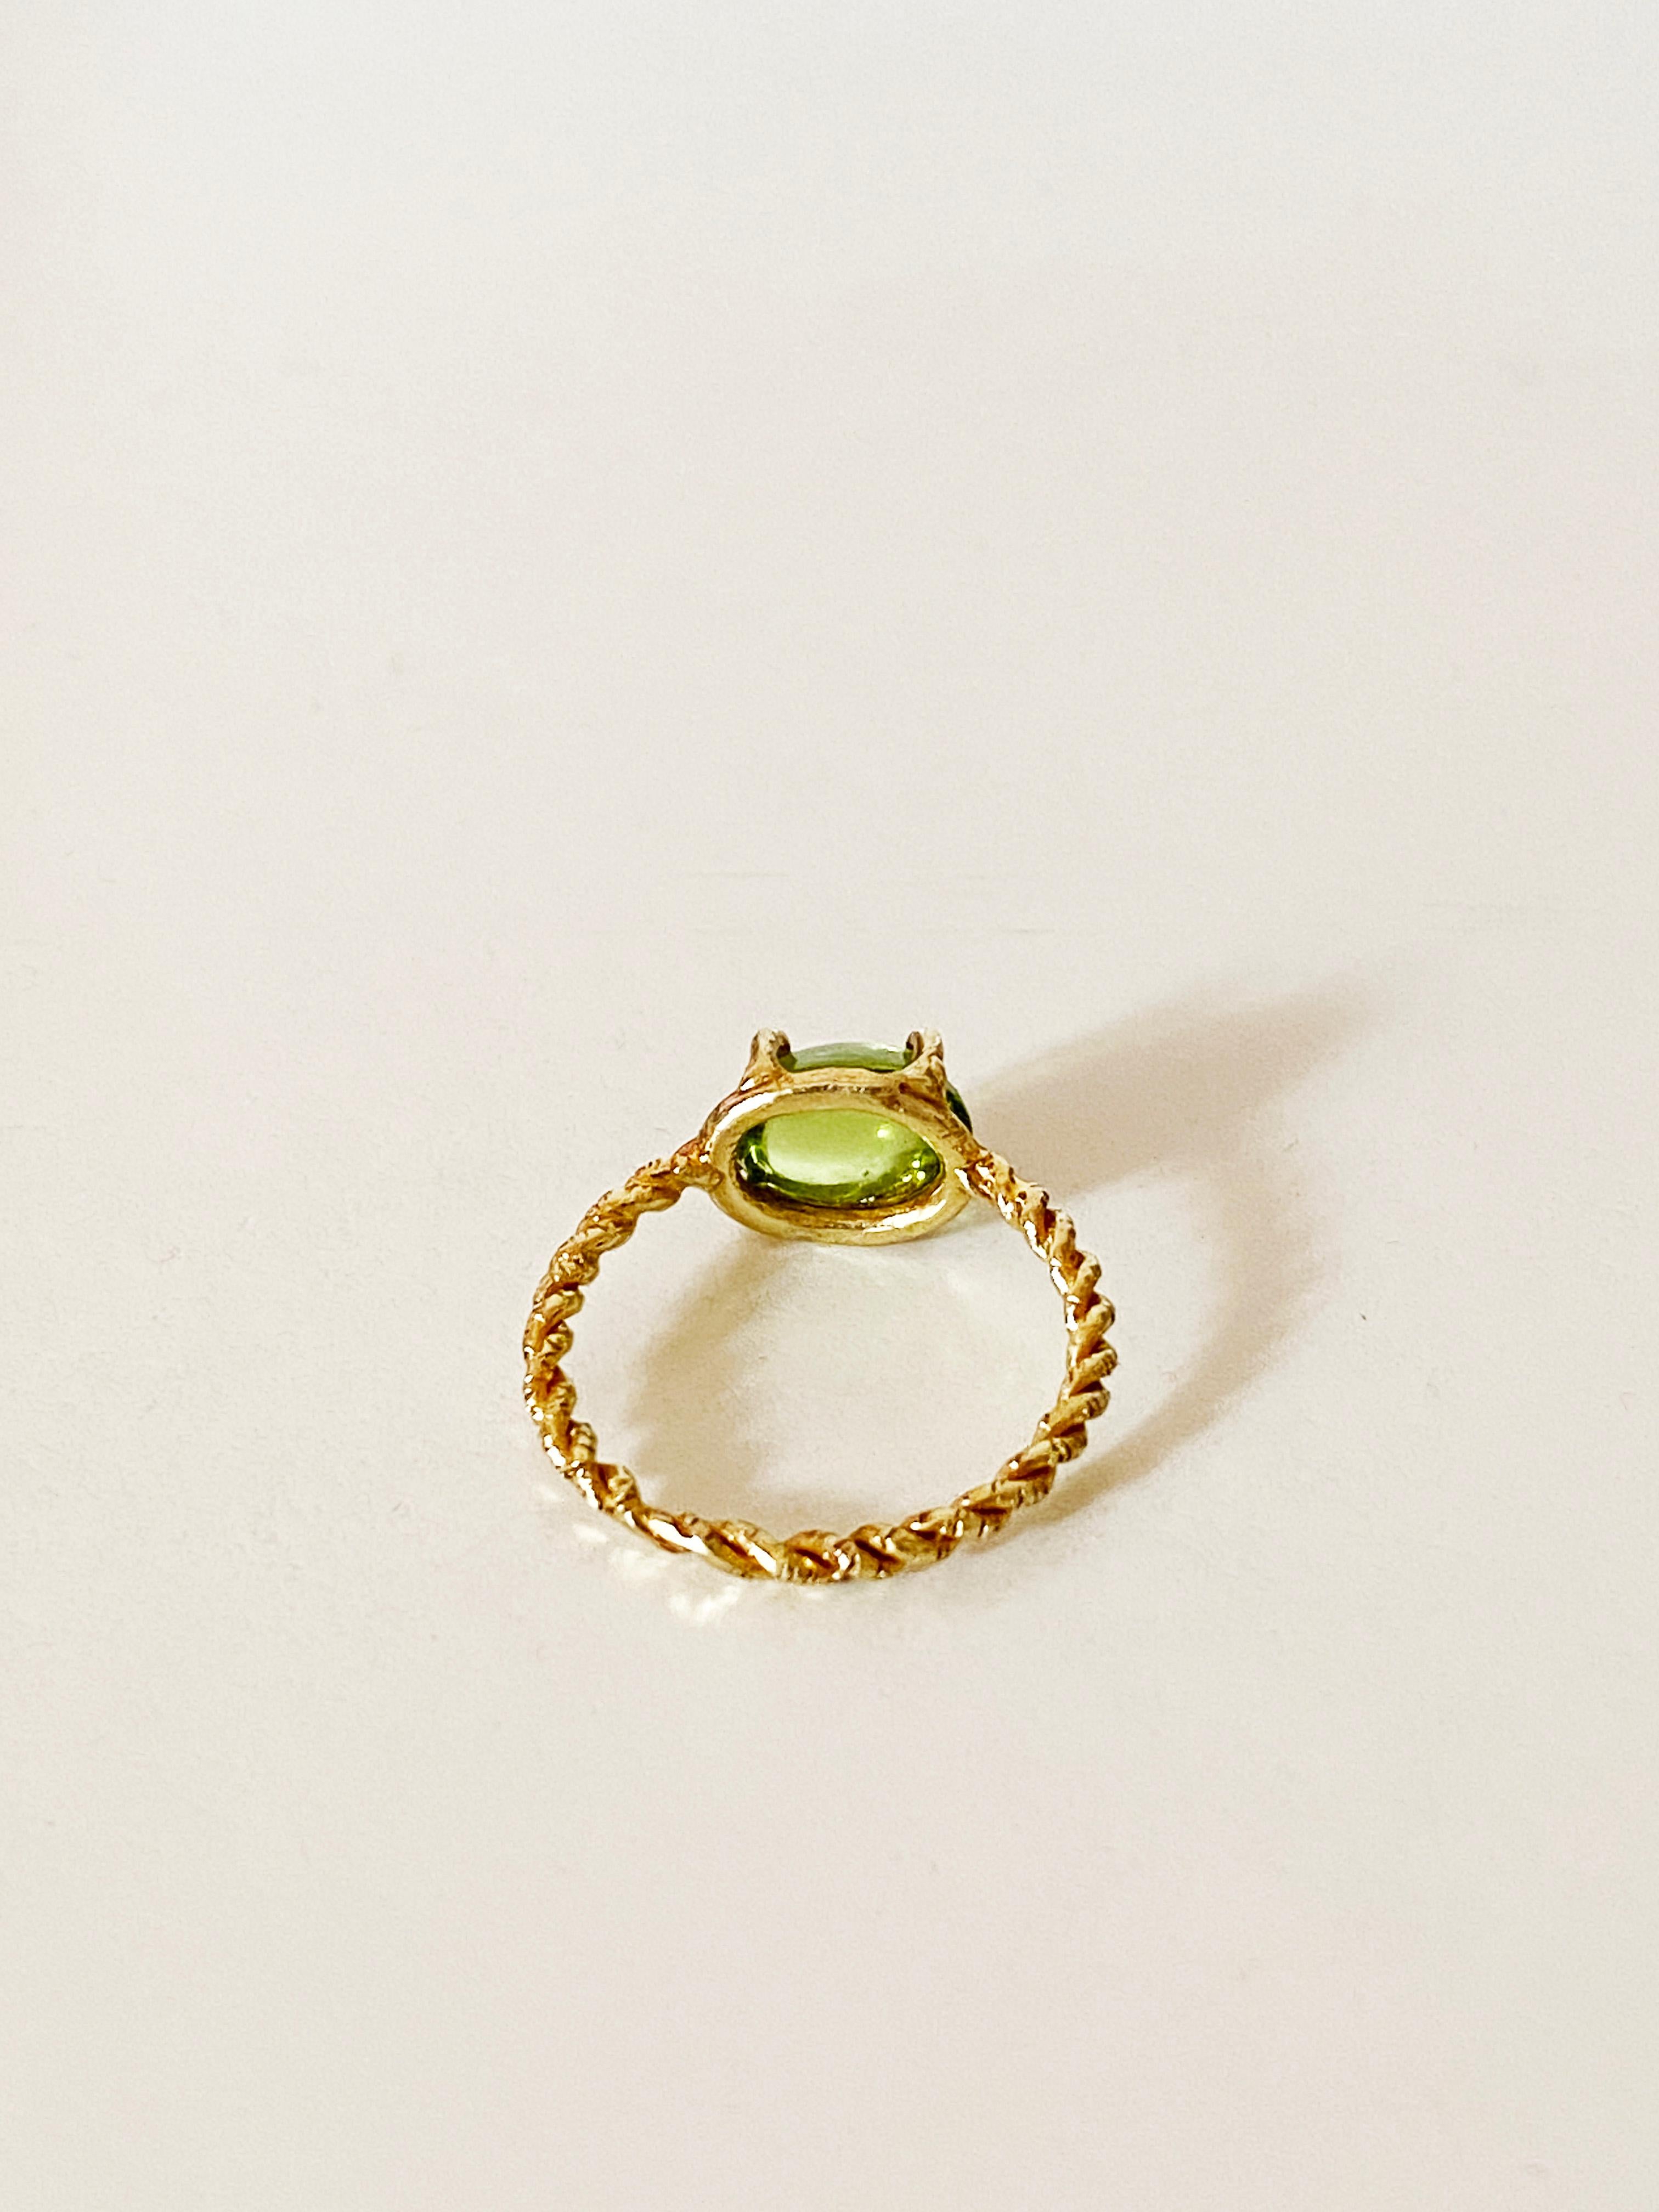 Oval Cut Rossella Ugolini 18K Yellow Gold Delicate Unique Peridot Ring Nature Inspired For Sale